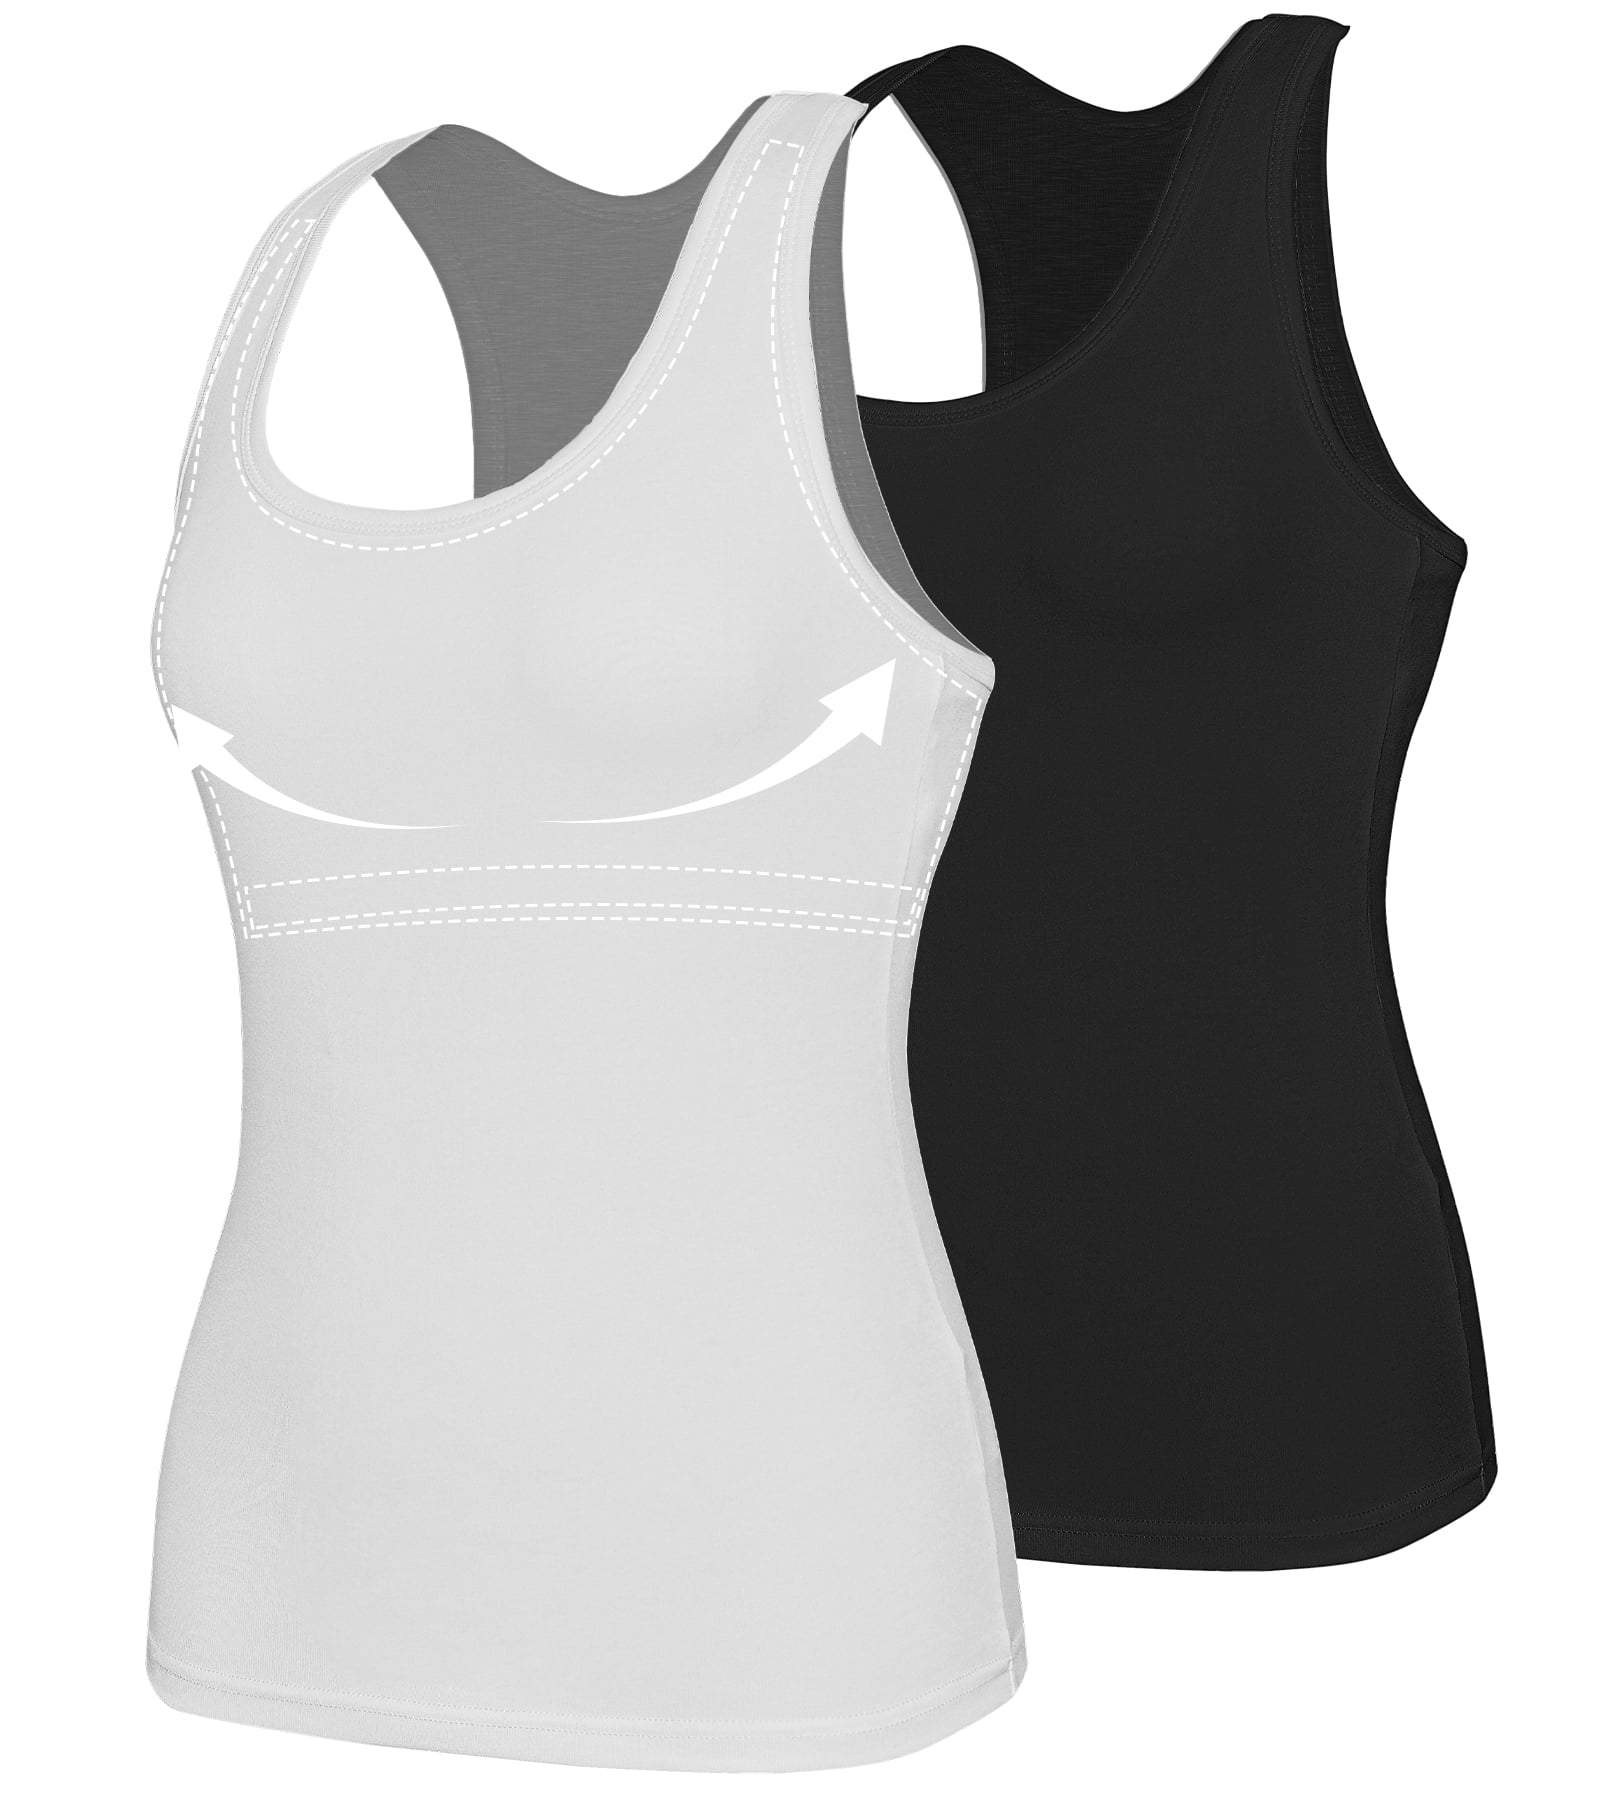 Anyfit Wear 2 Pack Racerback Workout Tank Tops With Shelf Bra for Women  Basic Athletic Tanks Yoga Undershirt Summer Sleeveless Exercise Tops  (S-3XL) 